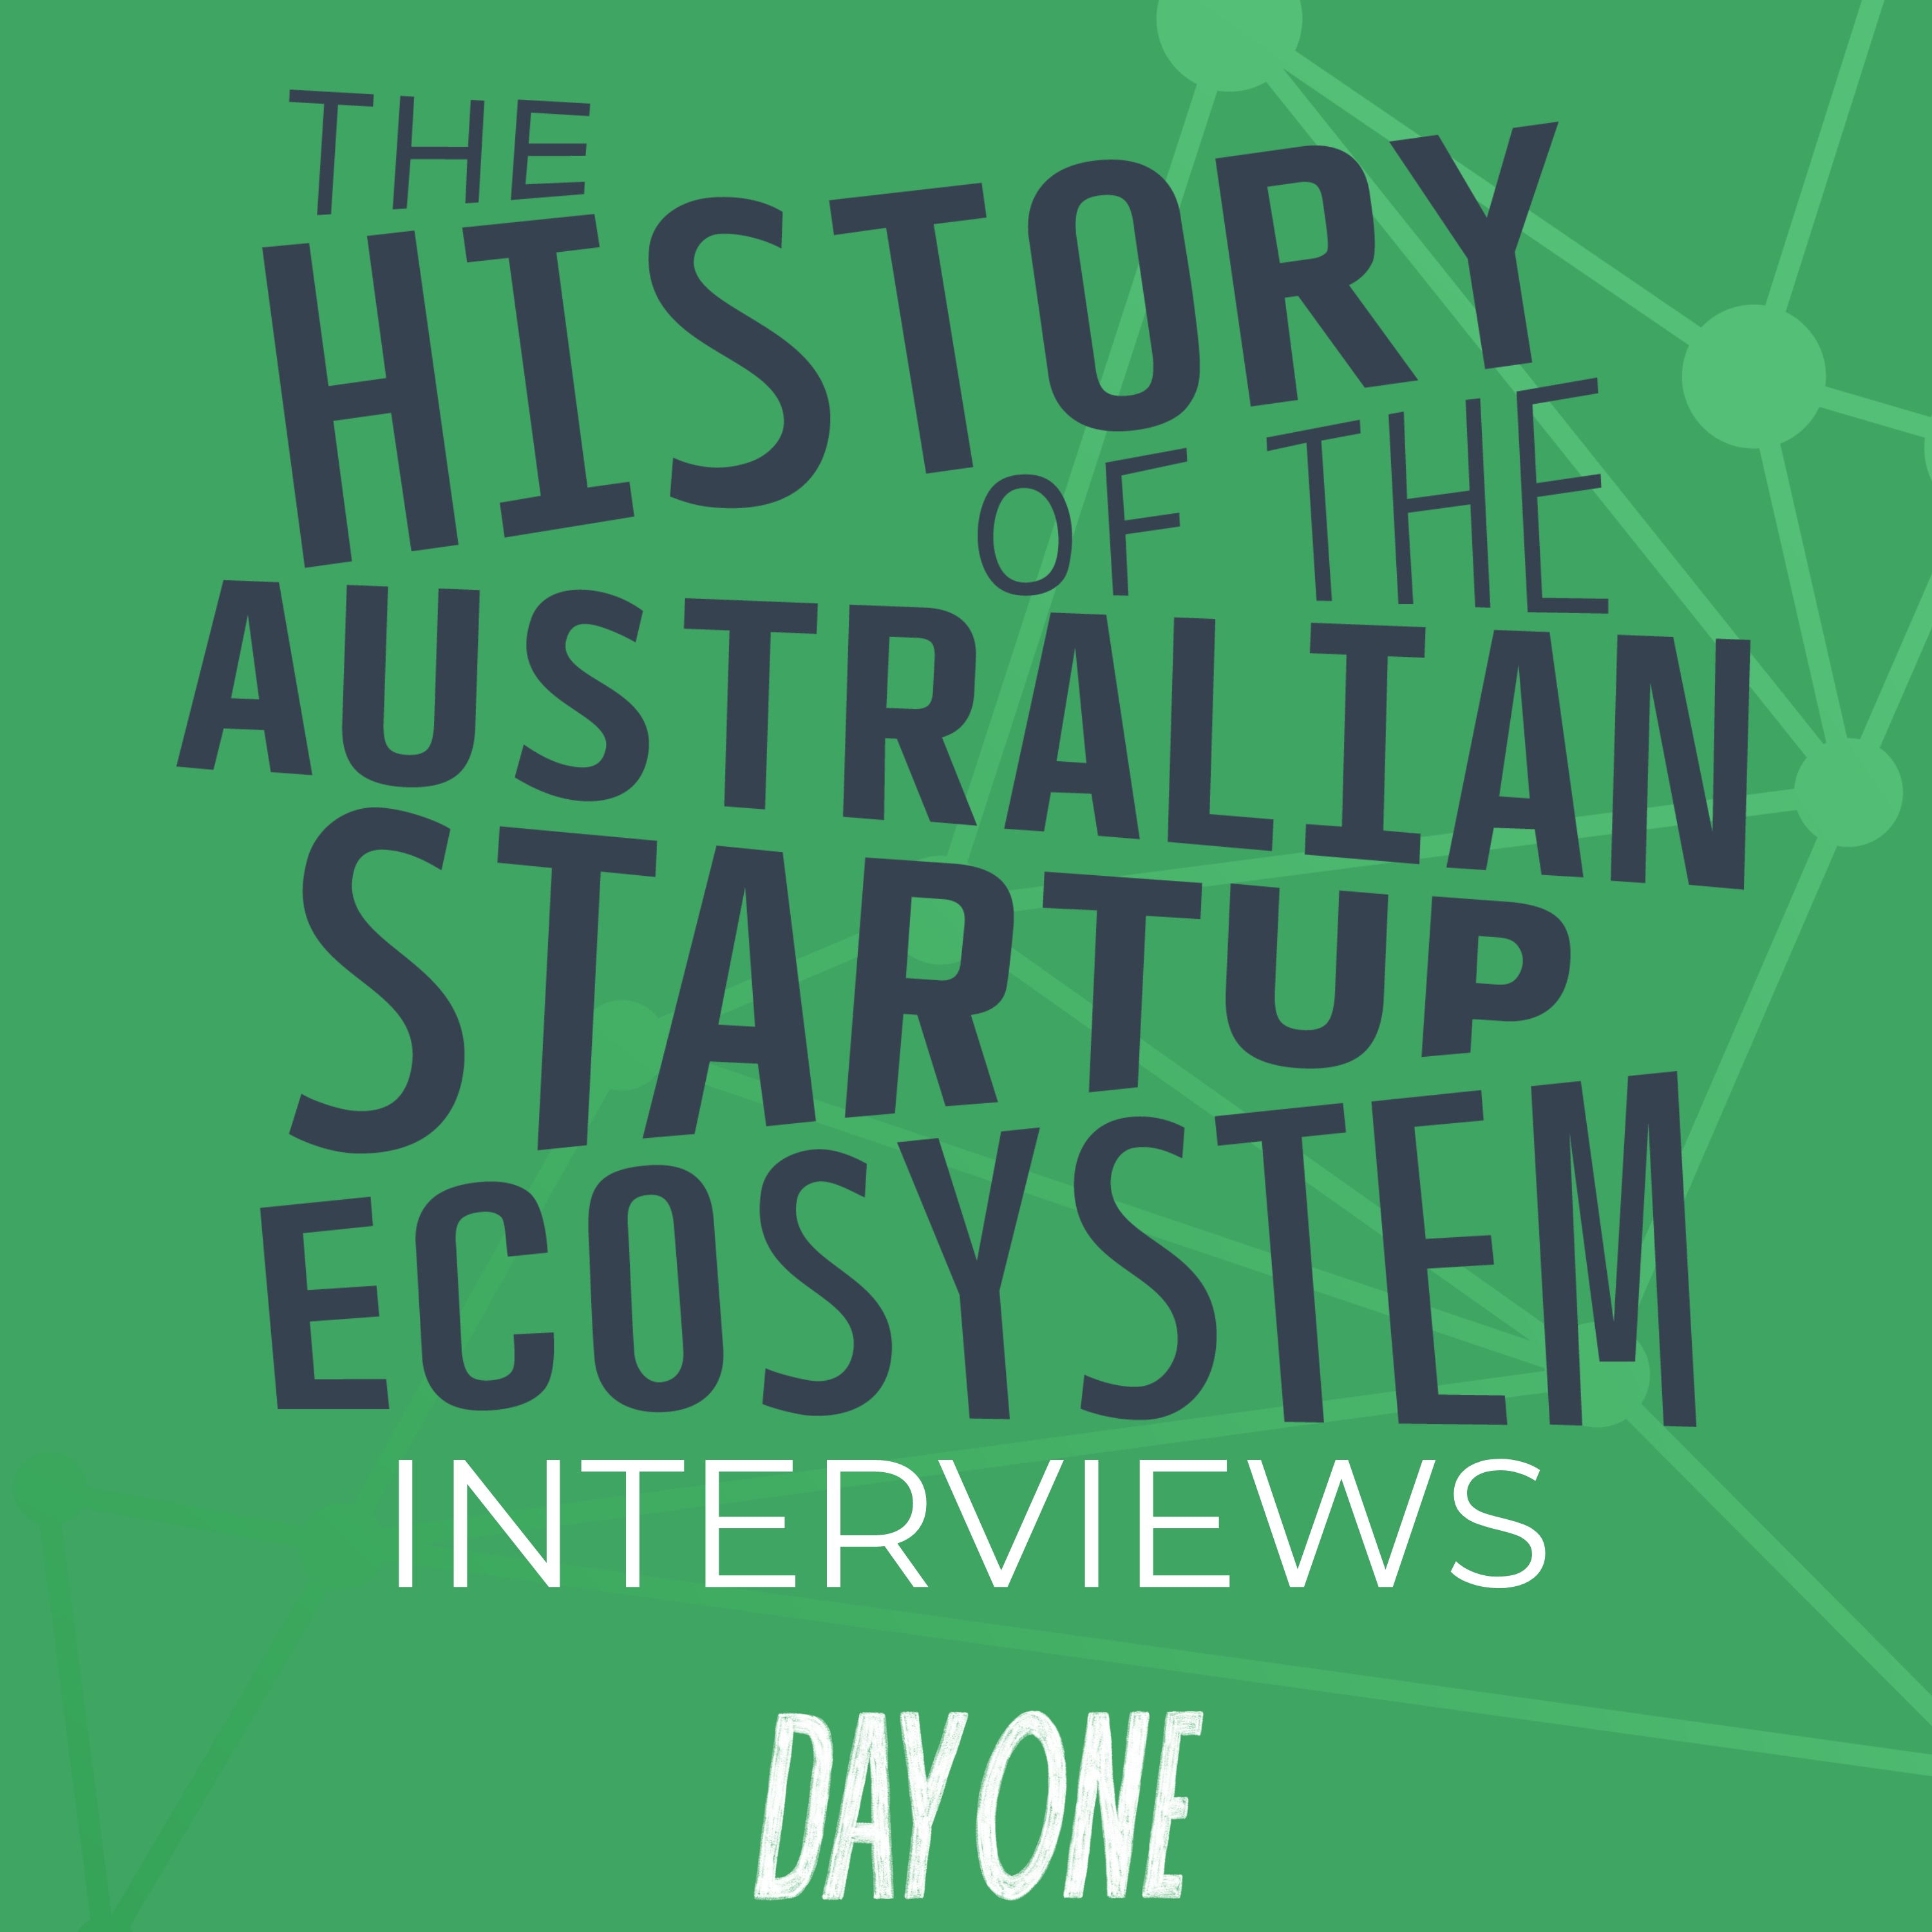 Evan Thornley discusses the evolution of the startup ecosystem